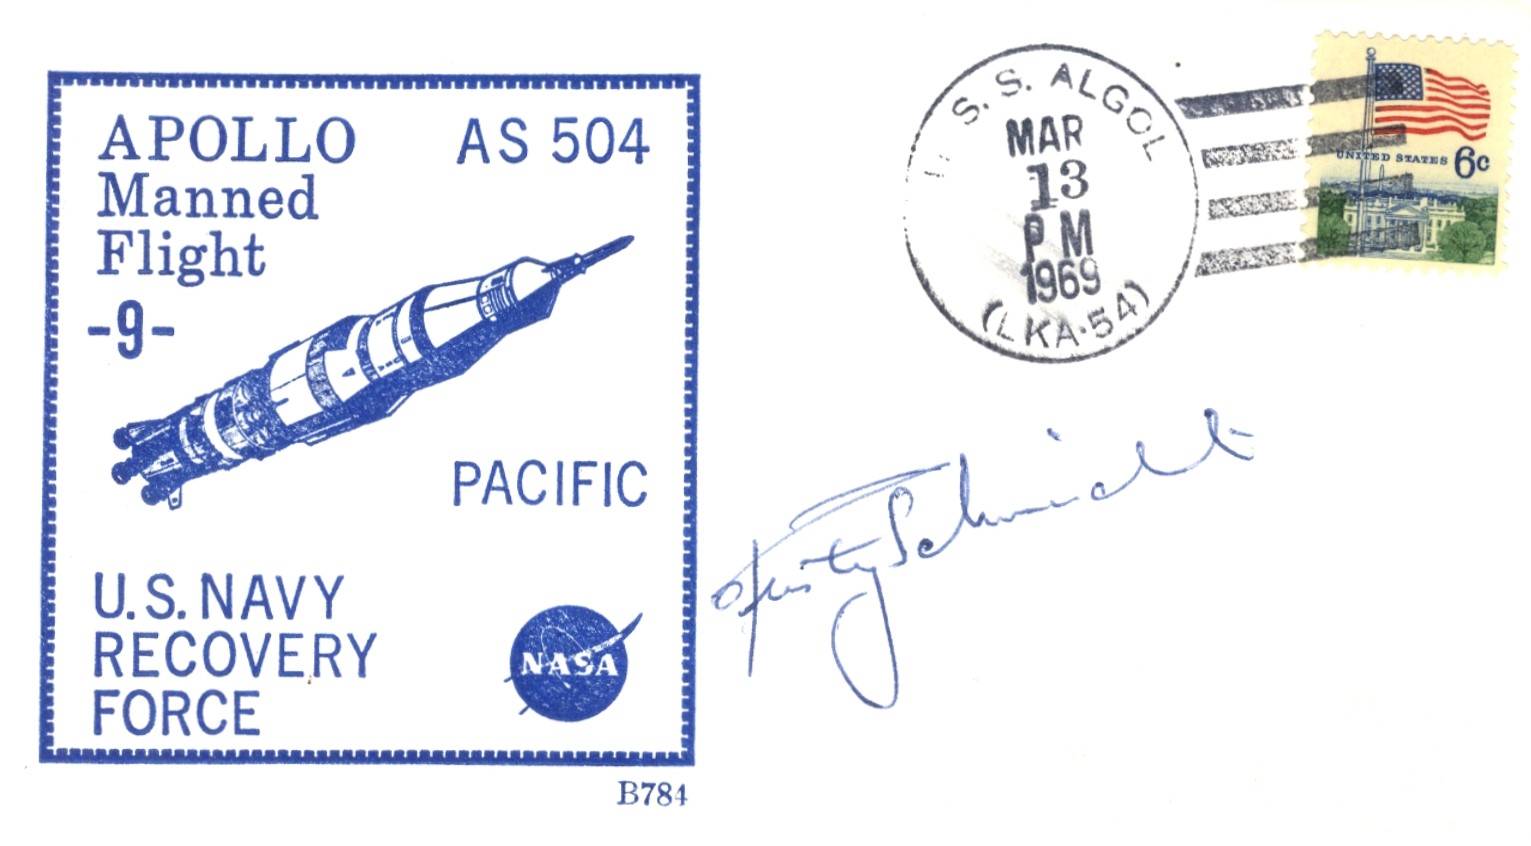 ASTRONAUTS: Small selection of signed Commemorative covers by various American astronauts. - Image 2 of 5